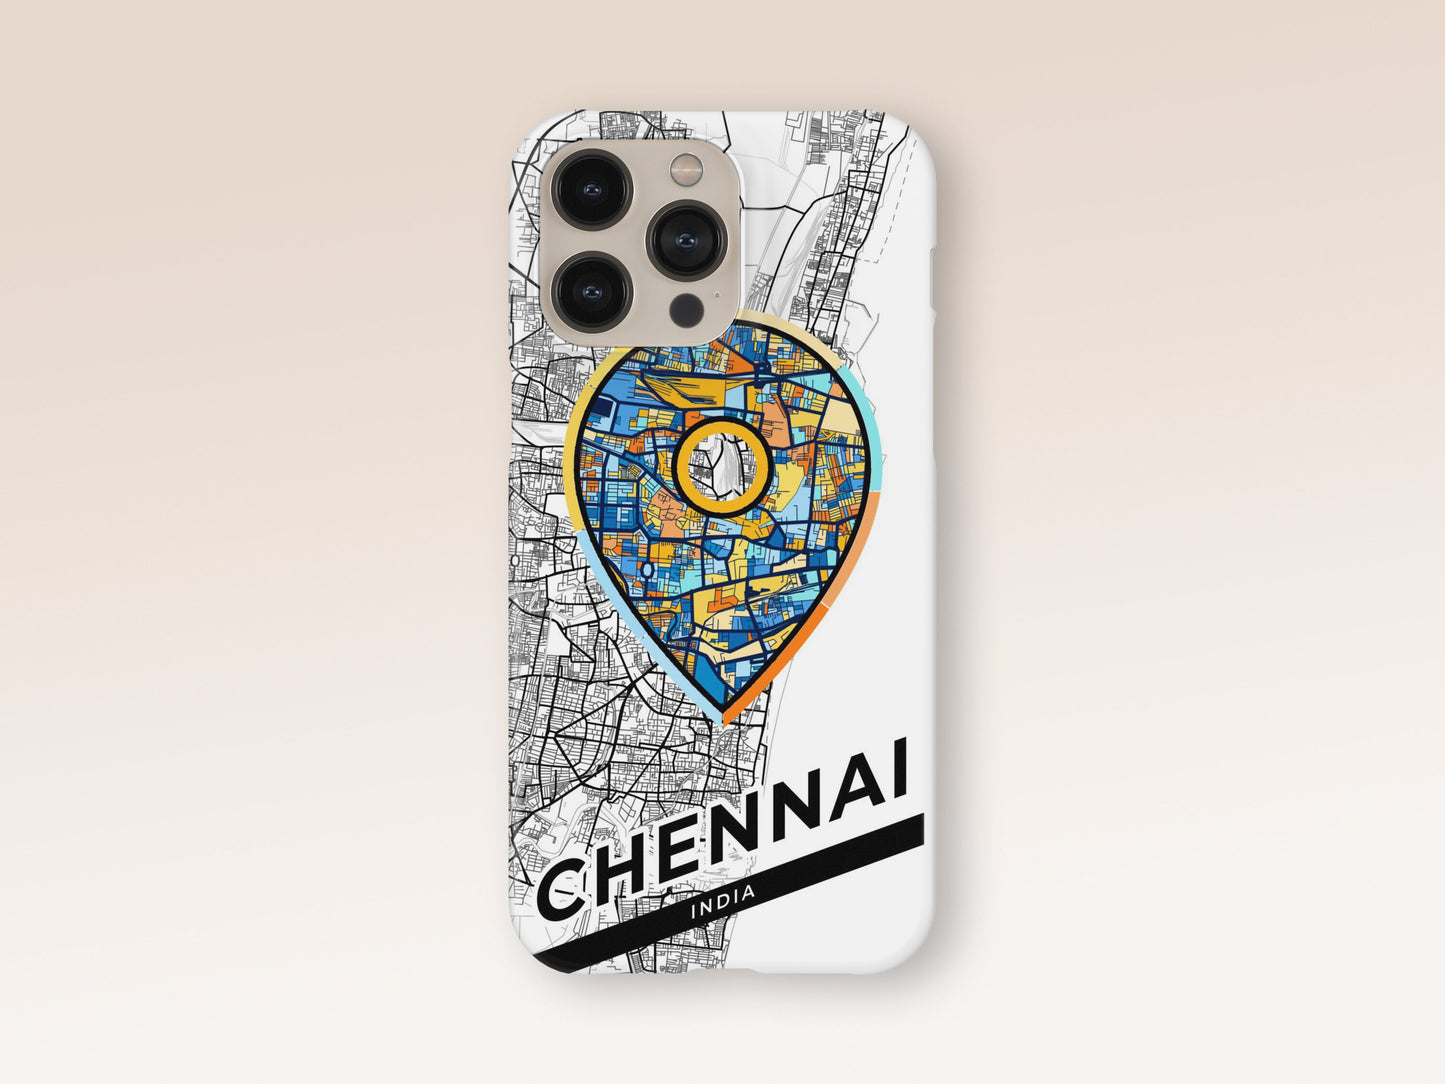 Chennai India slim phone case with colorful icon. Birthday, wedding or housewarming gift. Couple match cases. 1